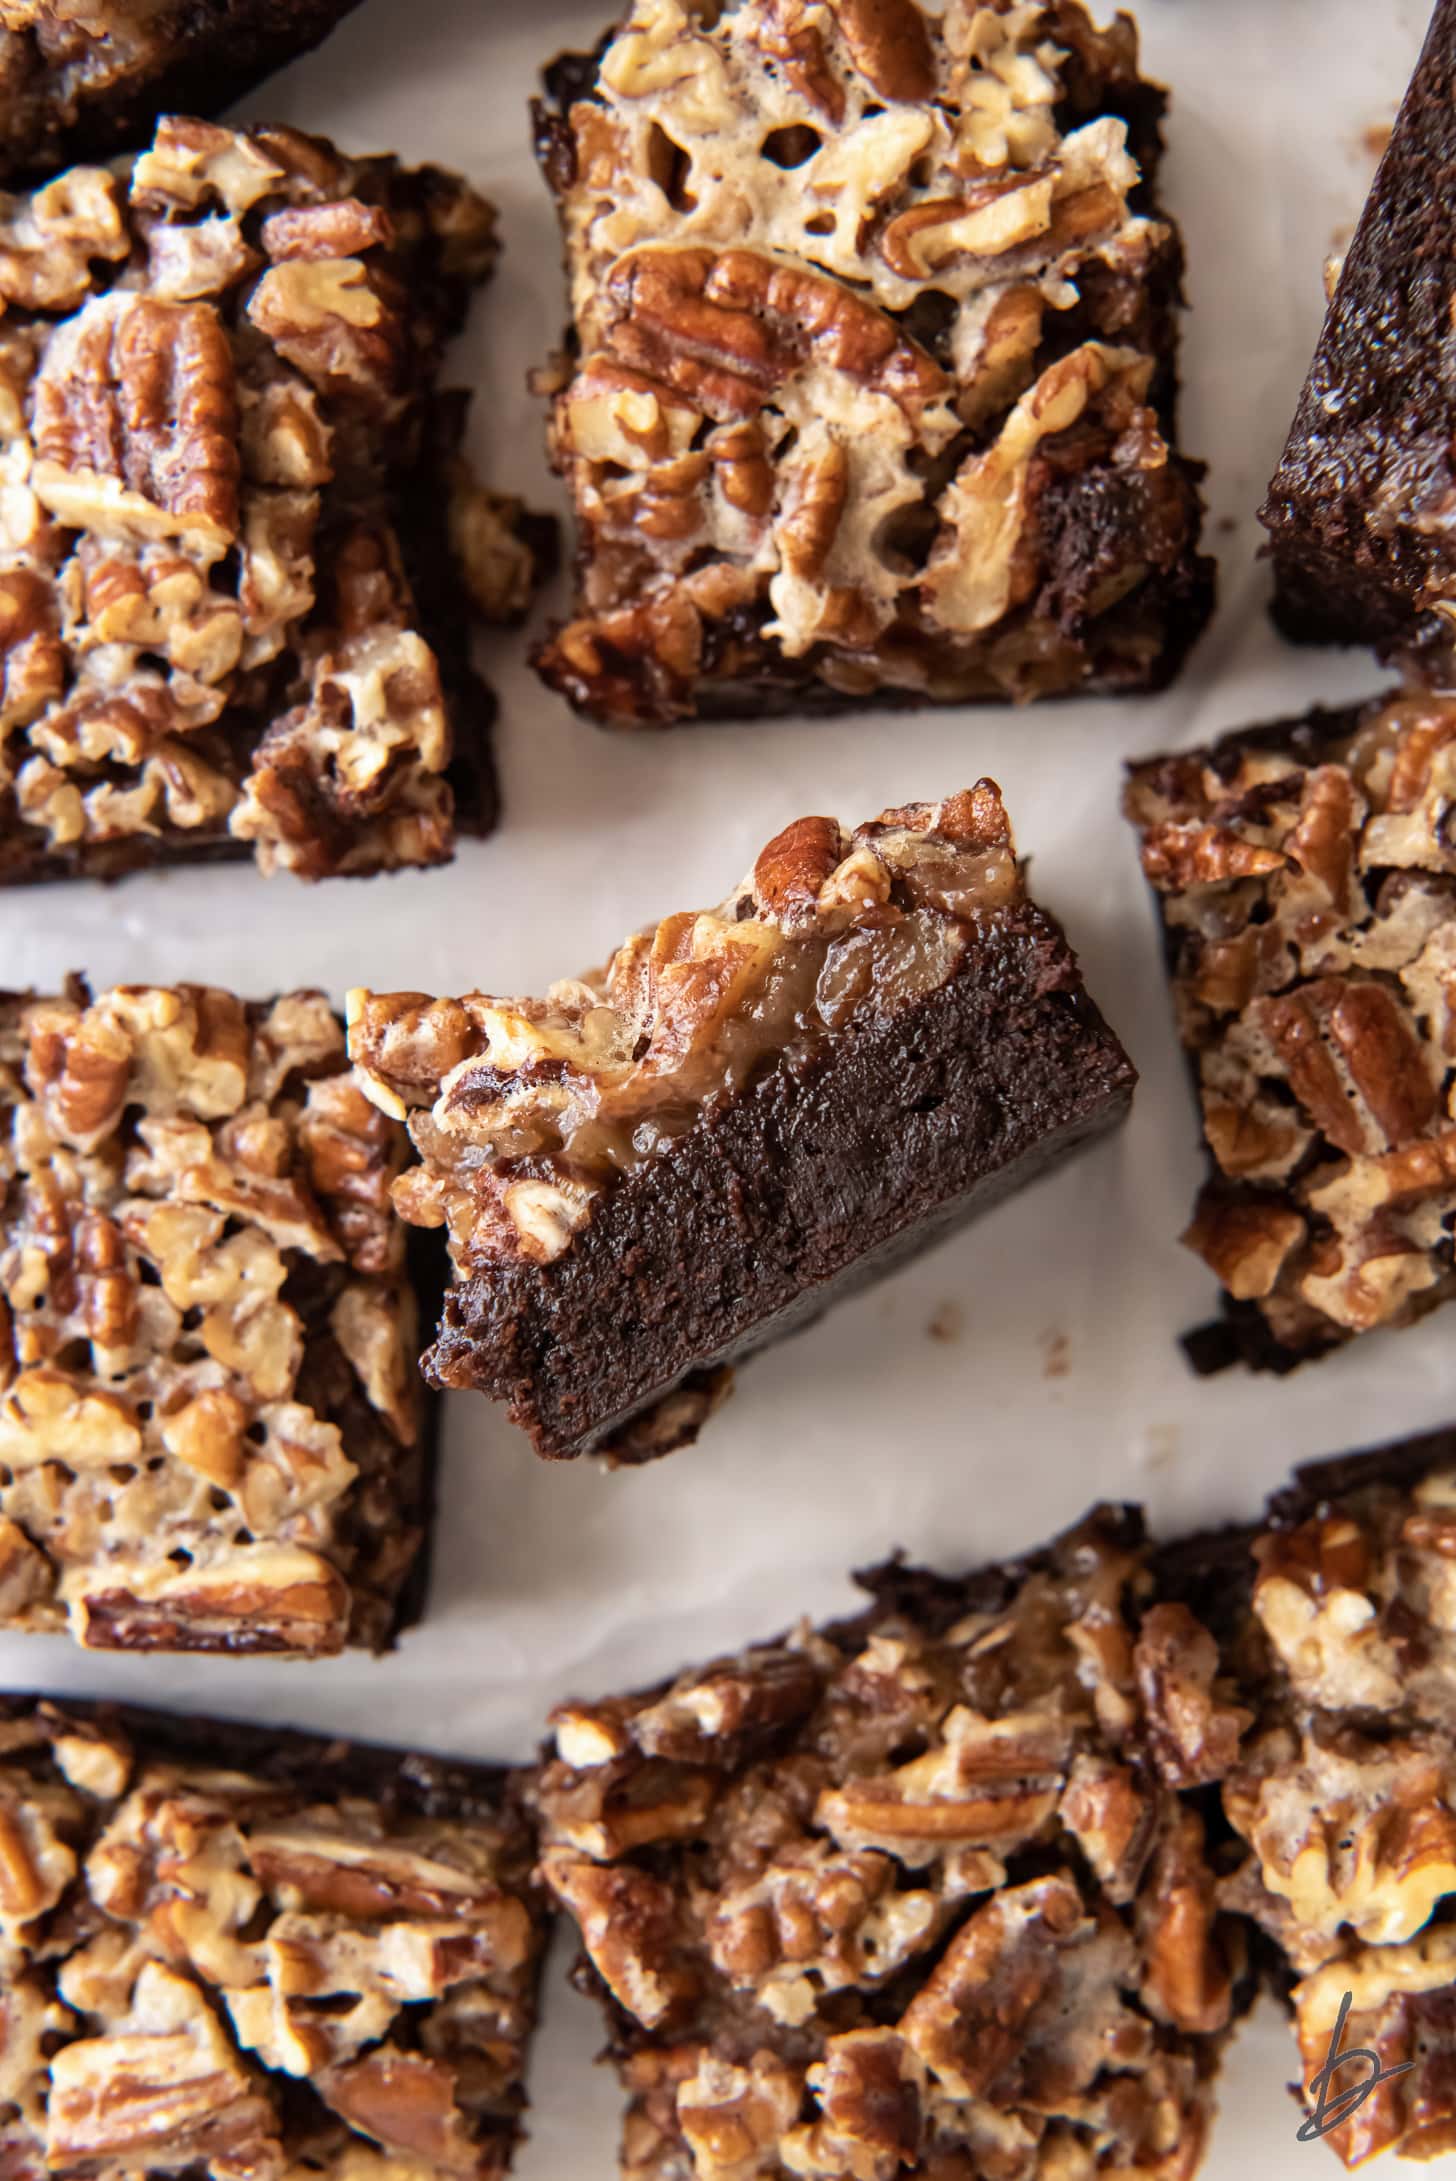 bourbon pecan pie brownie on its side showing gooey layers surrounded by more brownies.